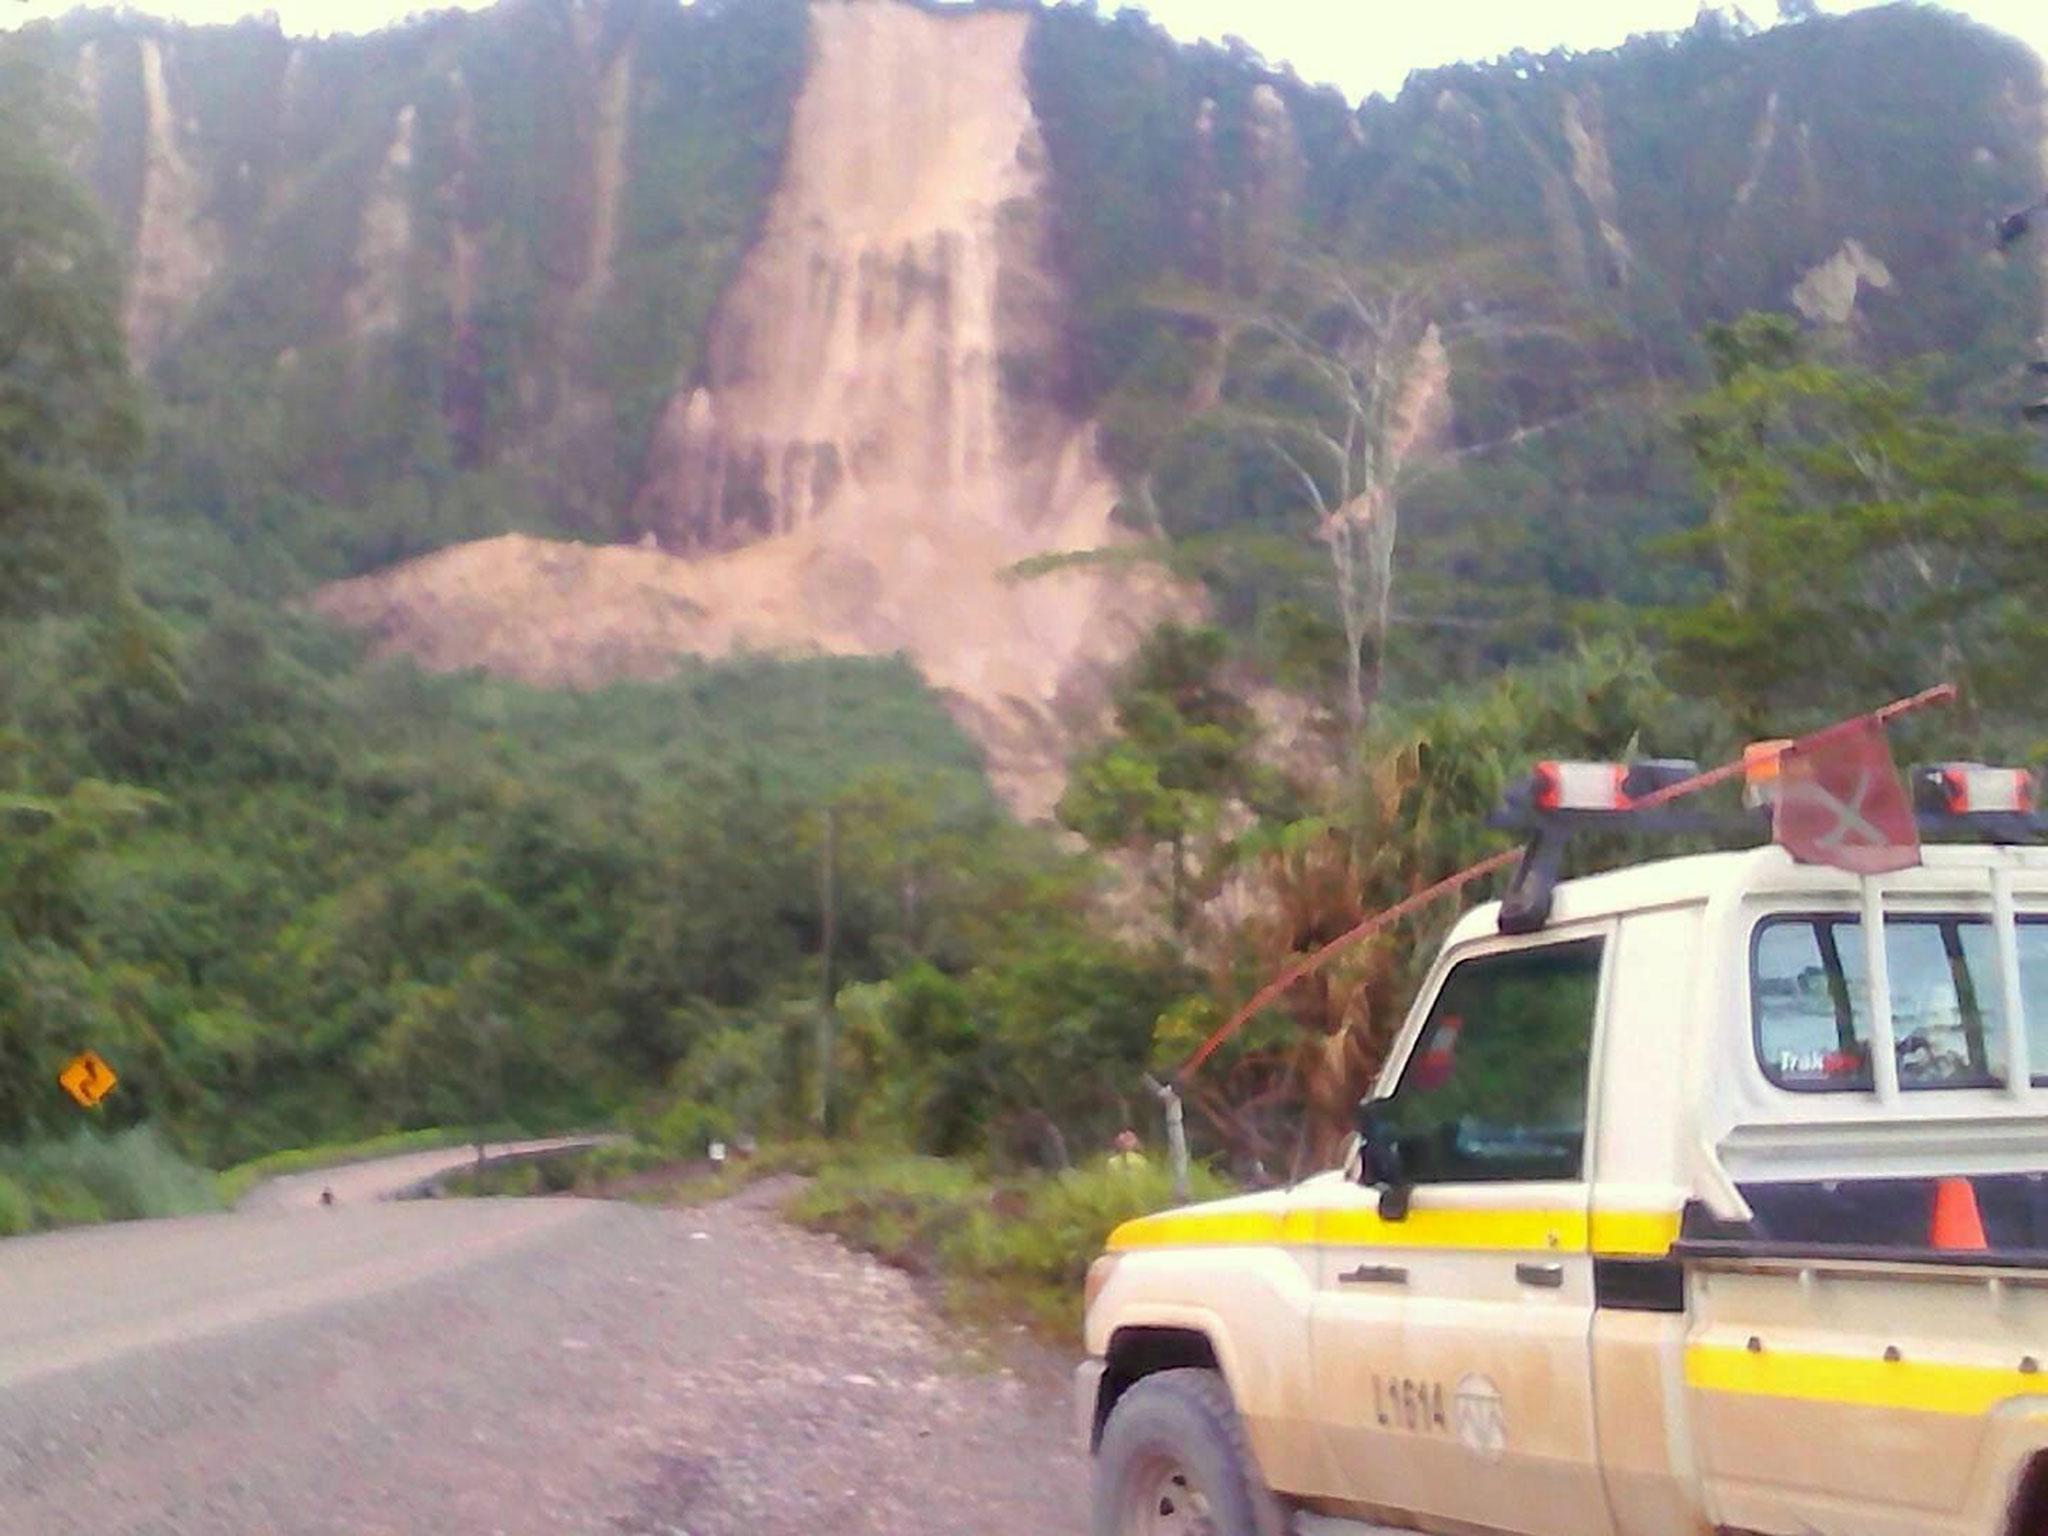 Locals near Tabubil inspect a landslide and damage to a road after a major earthquake struck Papua New Guinea's Southern Highlands